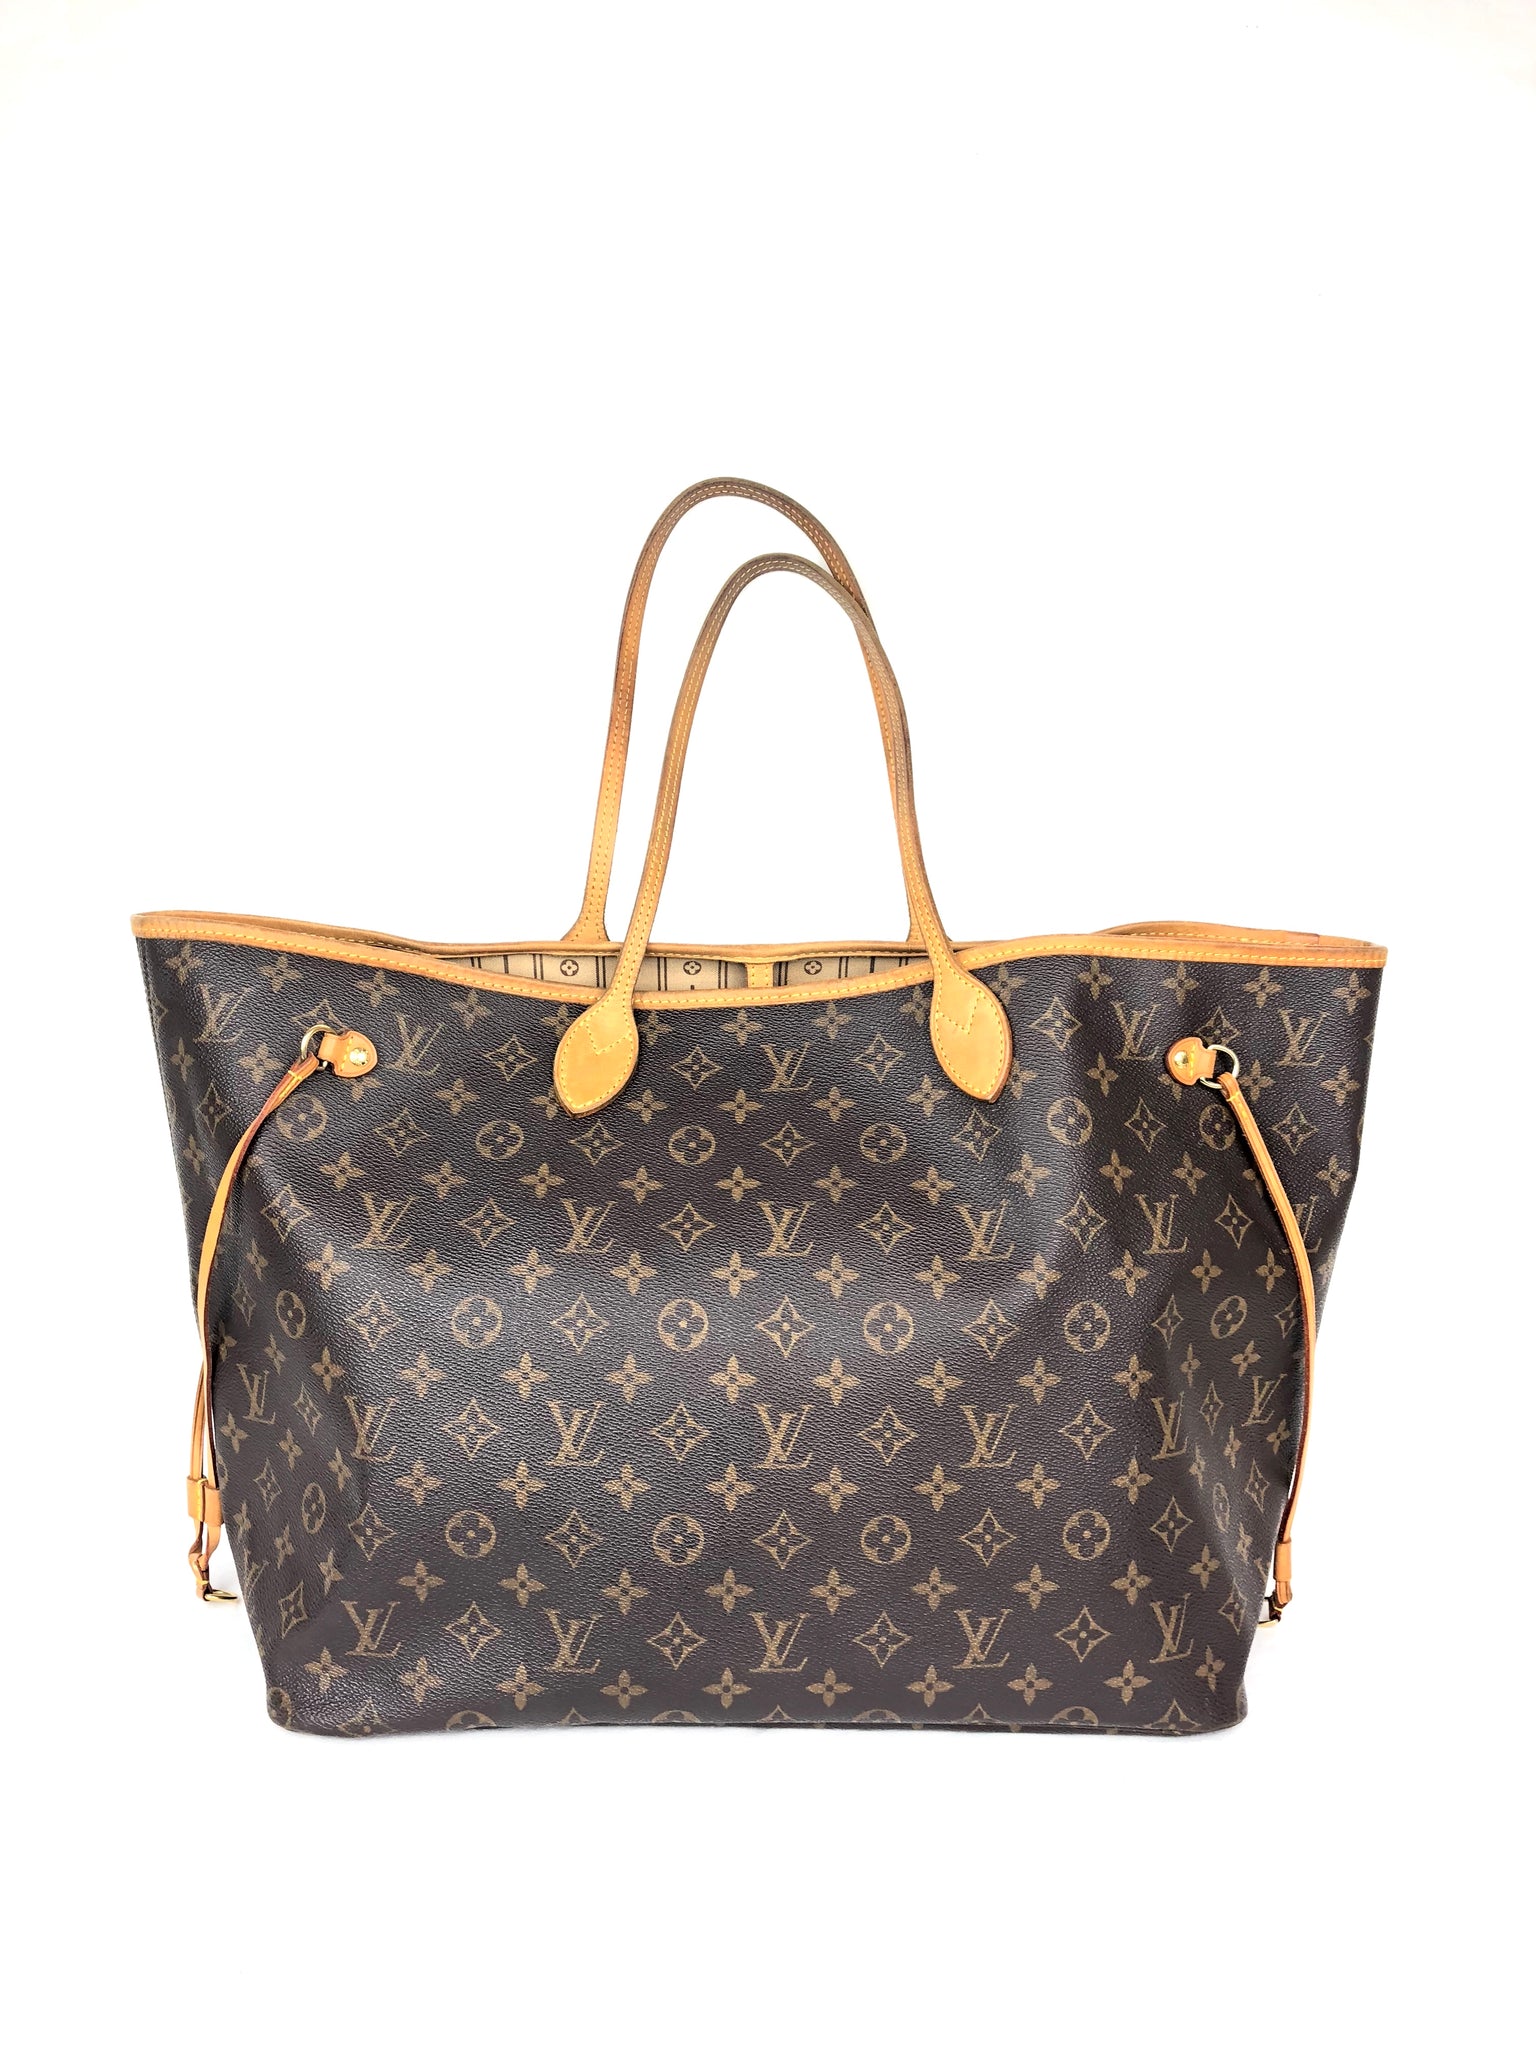 Louis Vuitton, Bags, Louis Vuitton Neverfull Gm Used Great Condition